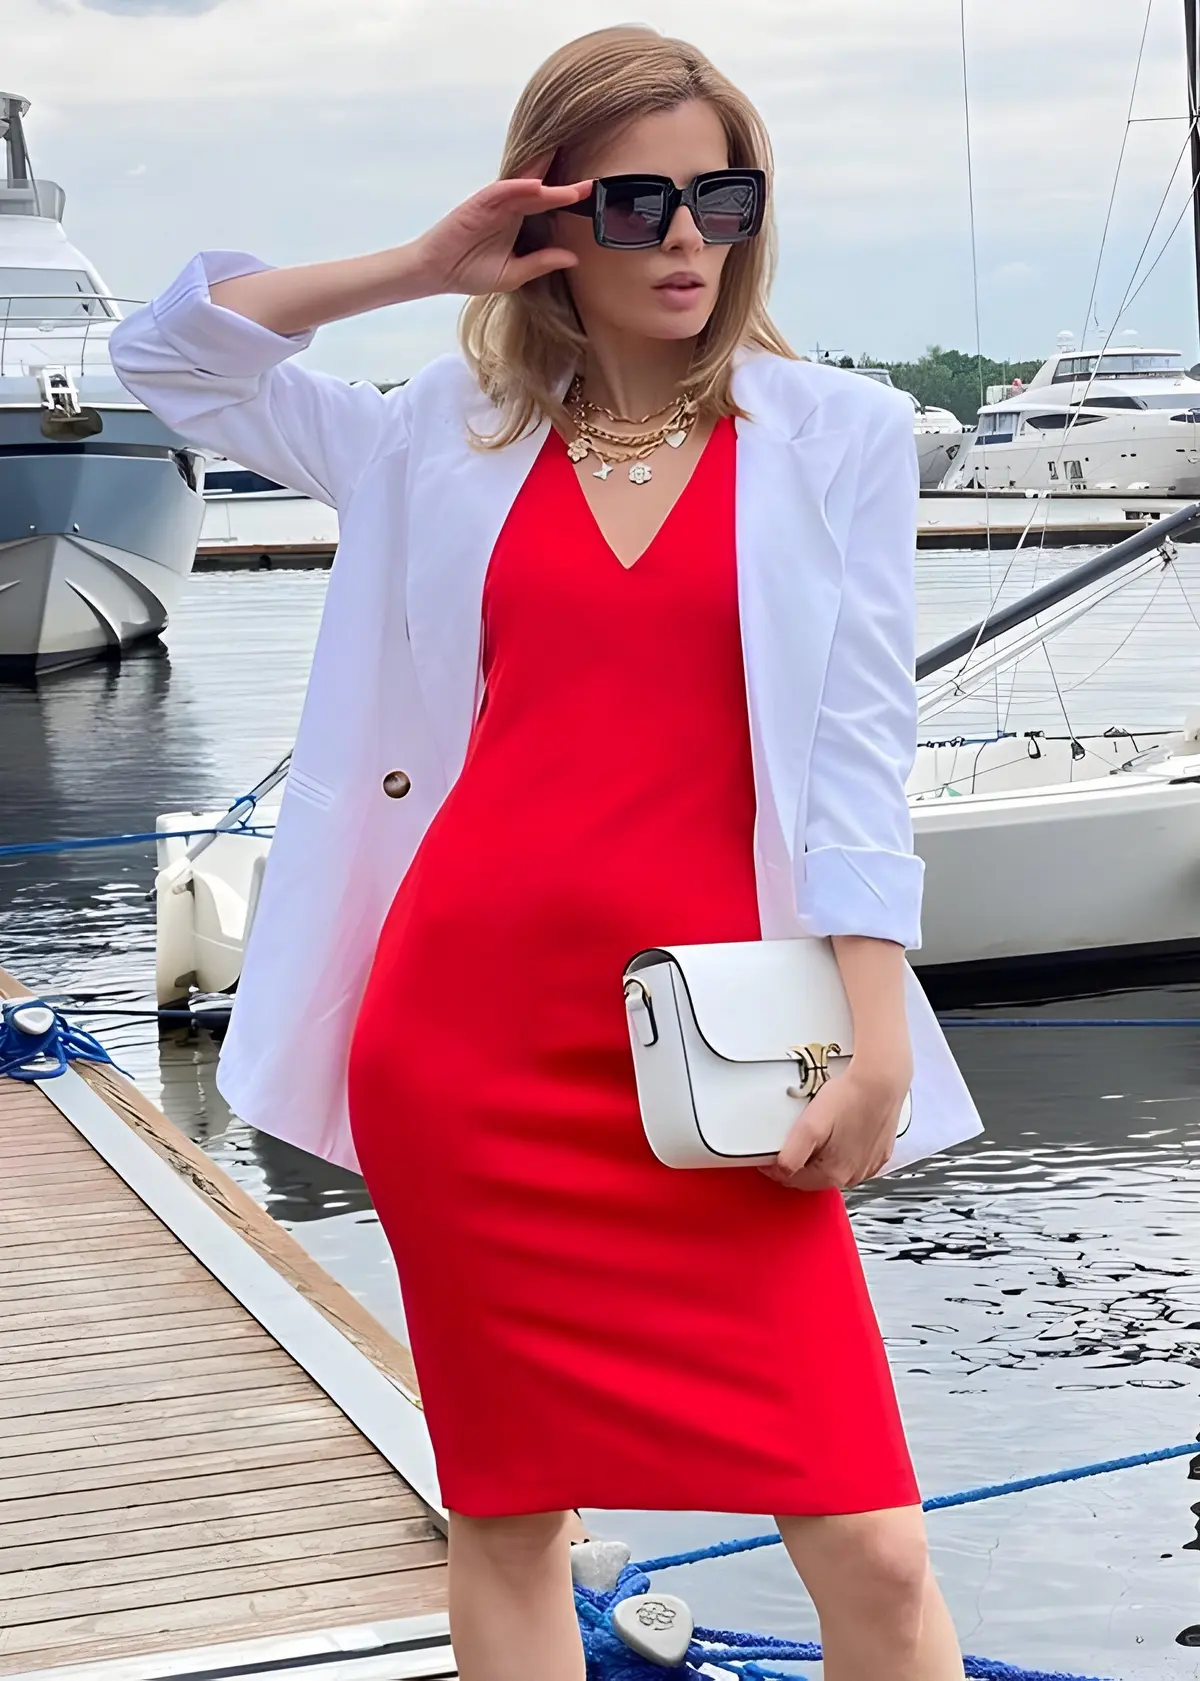 red dress paired with white jacket and handbag